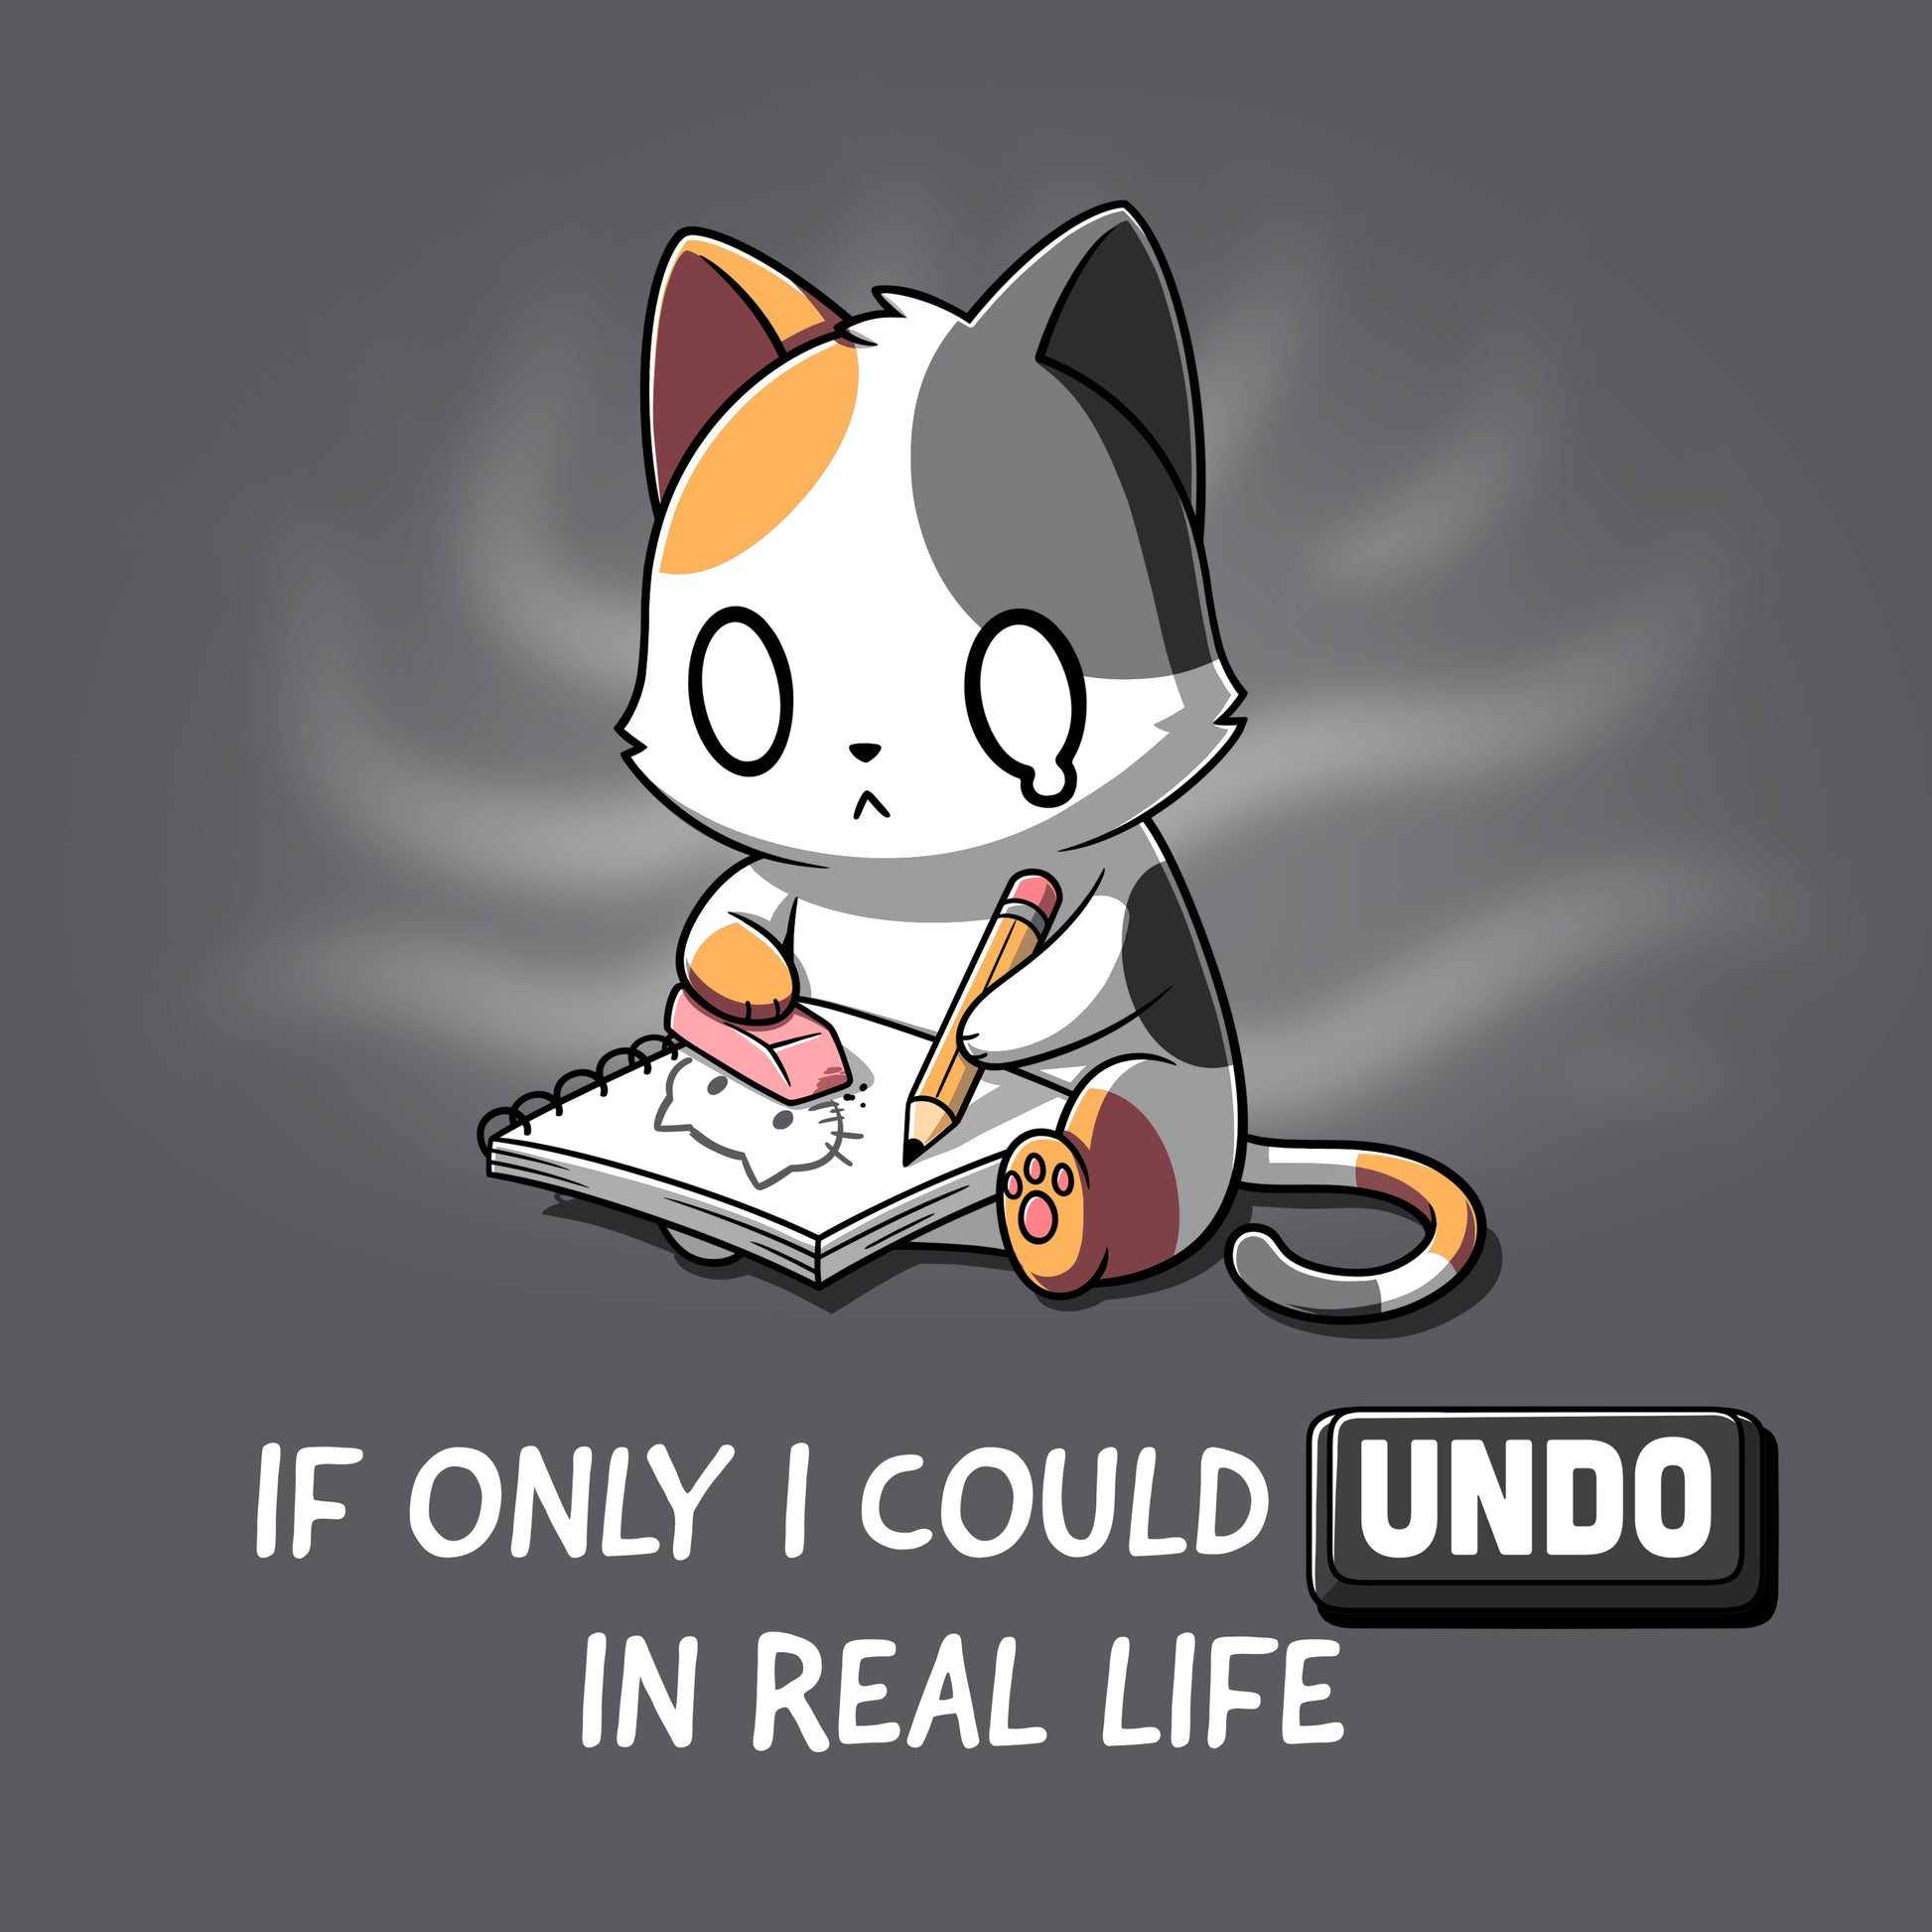 If only I could undo in real life, I would definitely appreciate a TeeTurtle handy t-shirt that makes it possible.